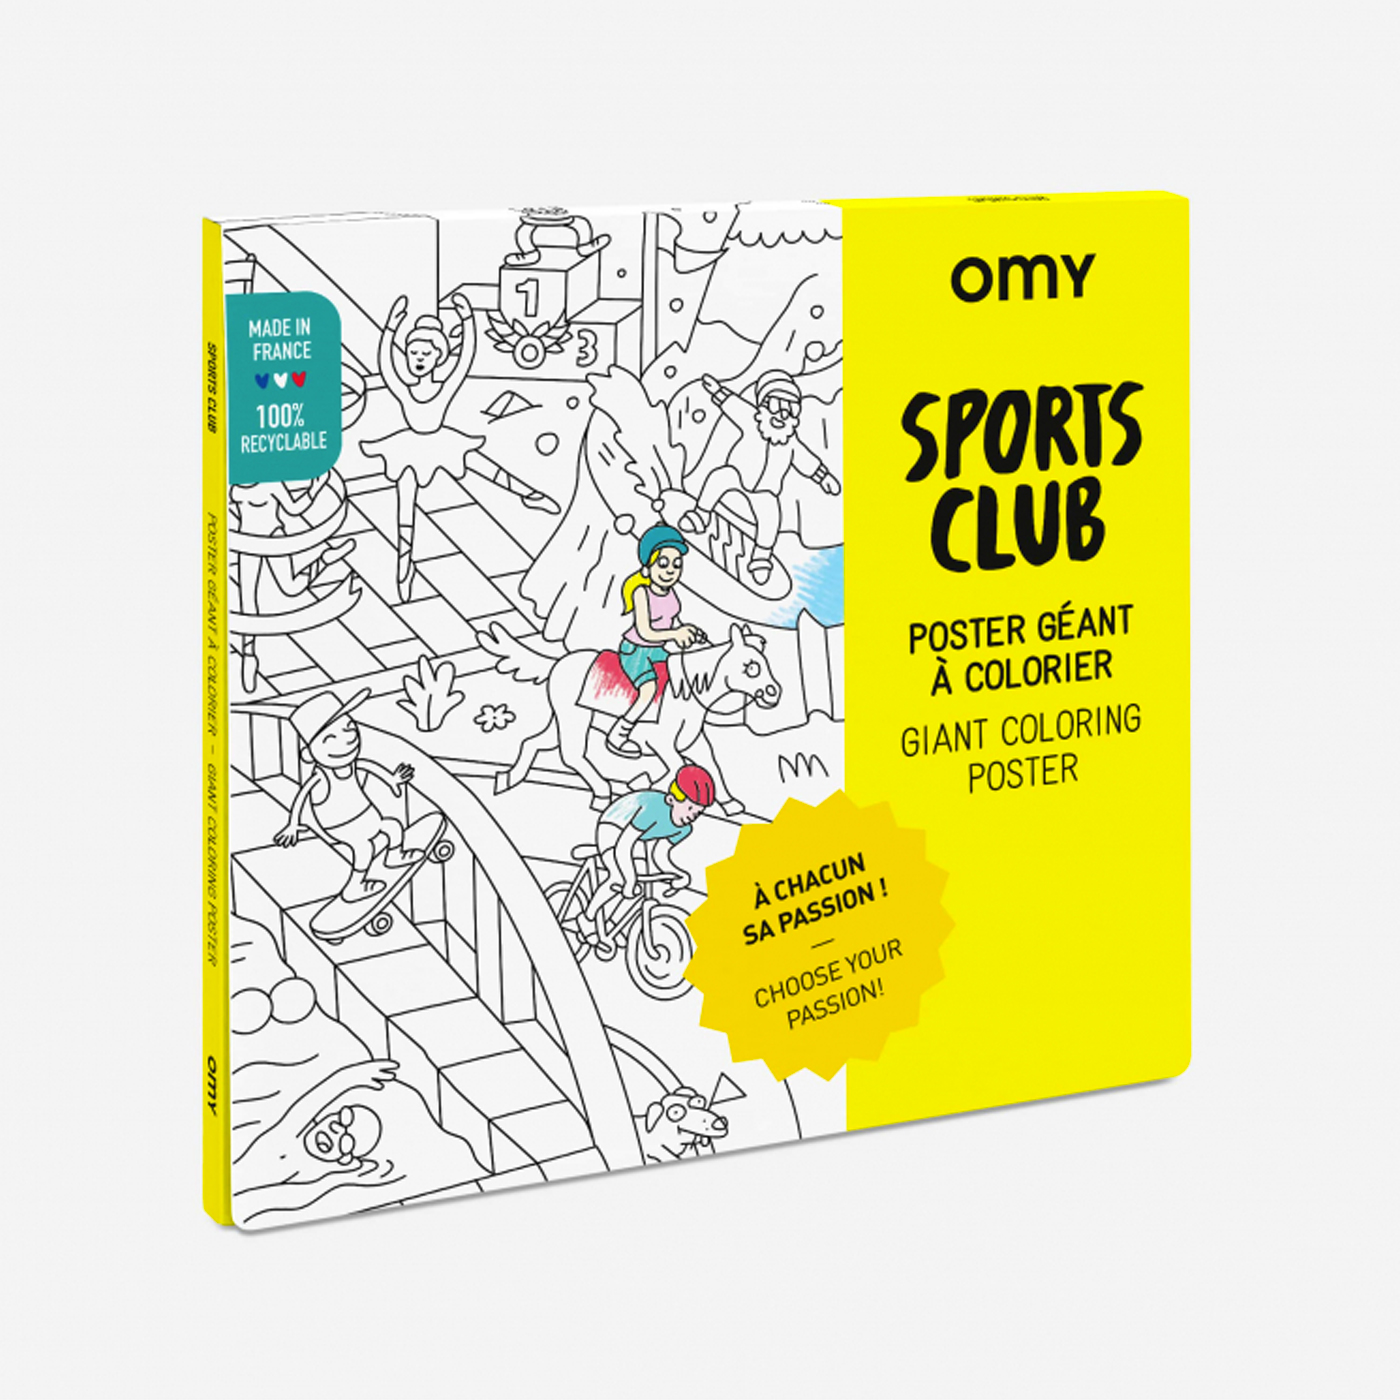 OMY Omy Coloring Poster  | Sports Club